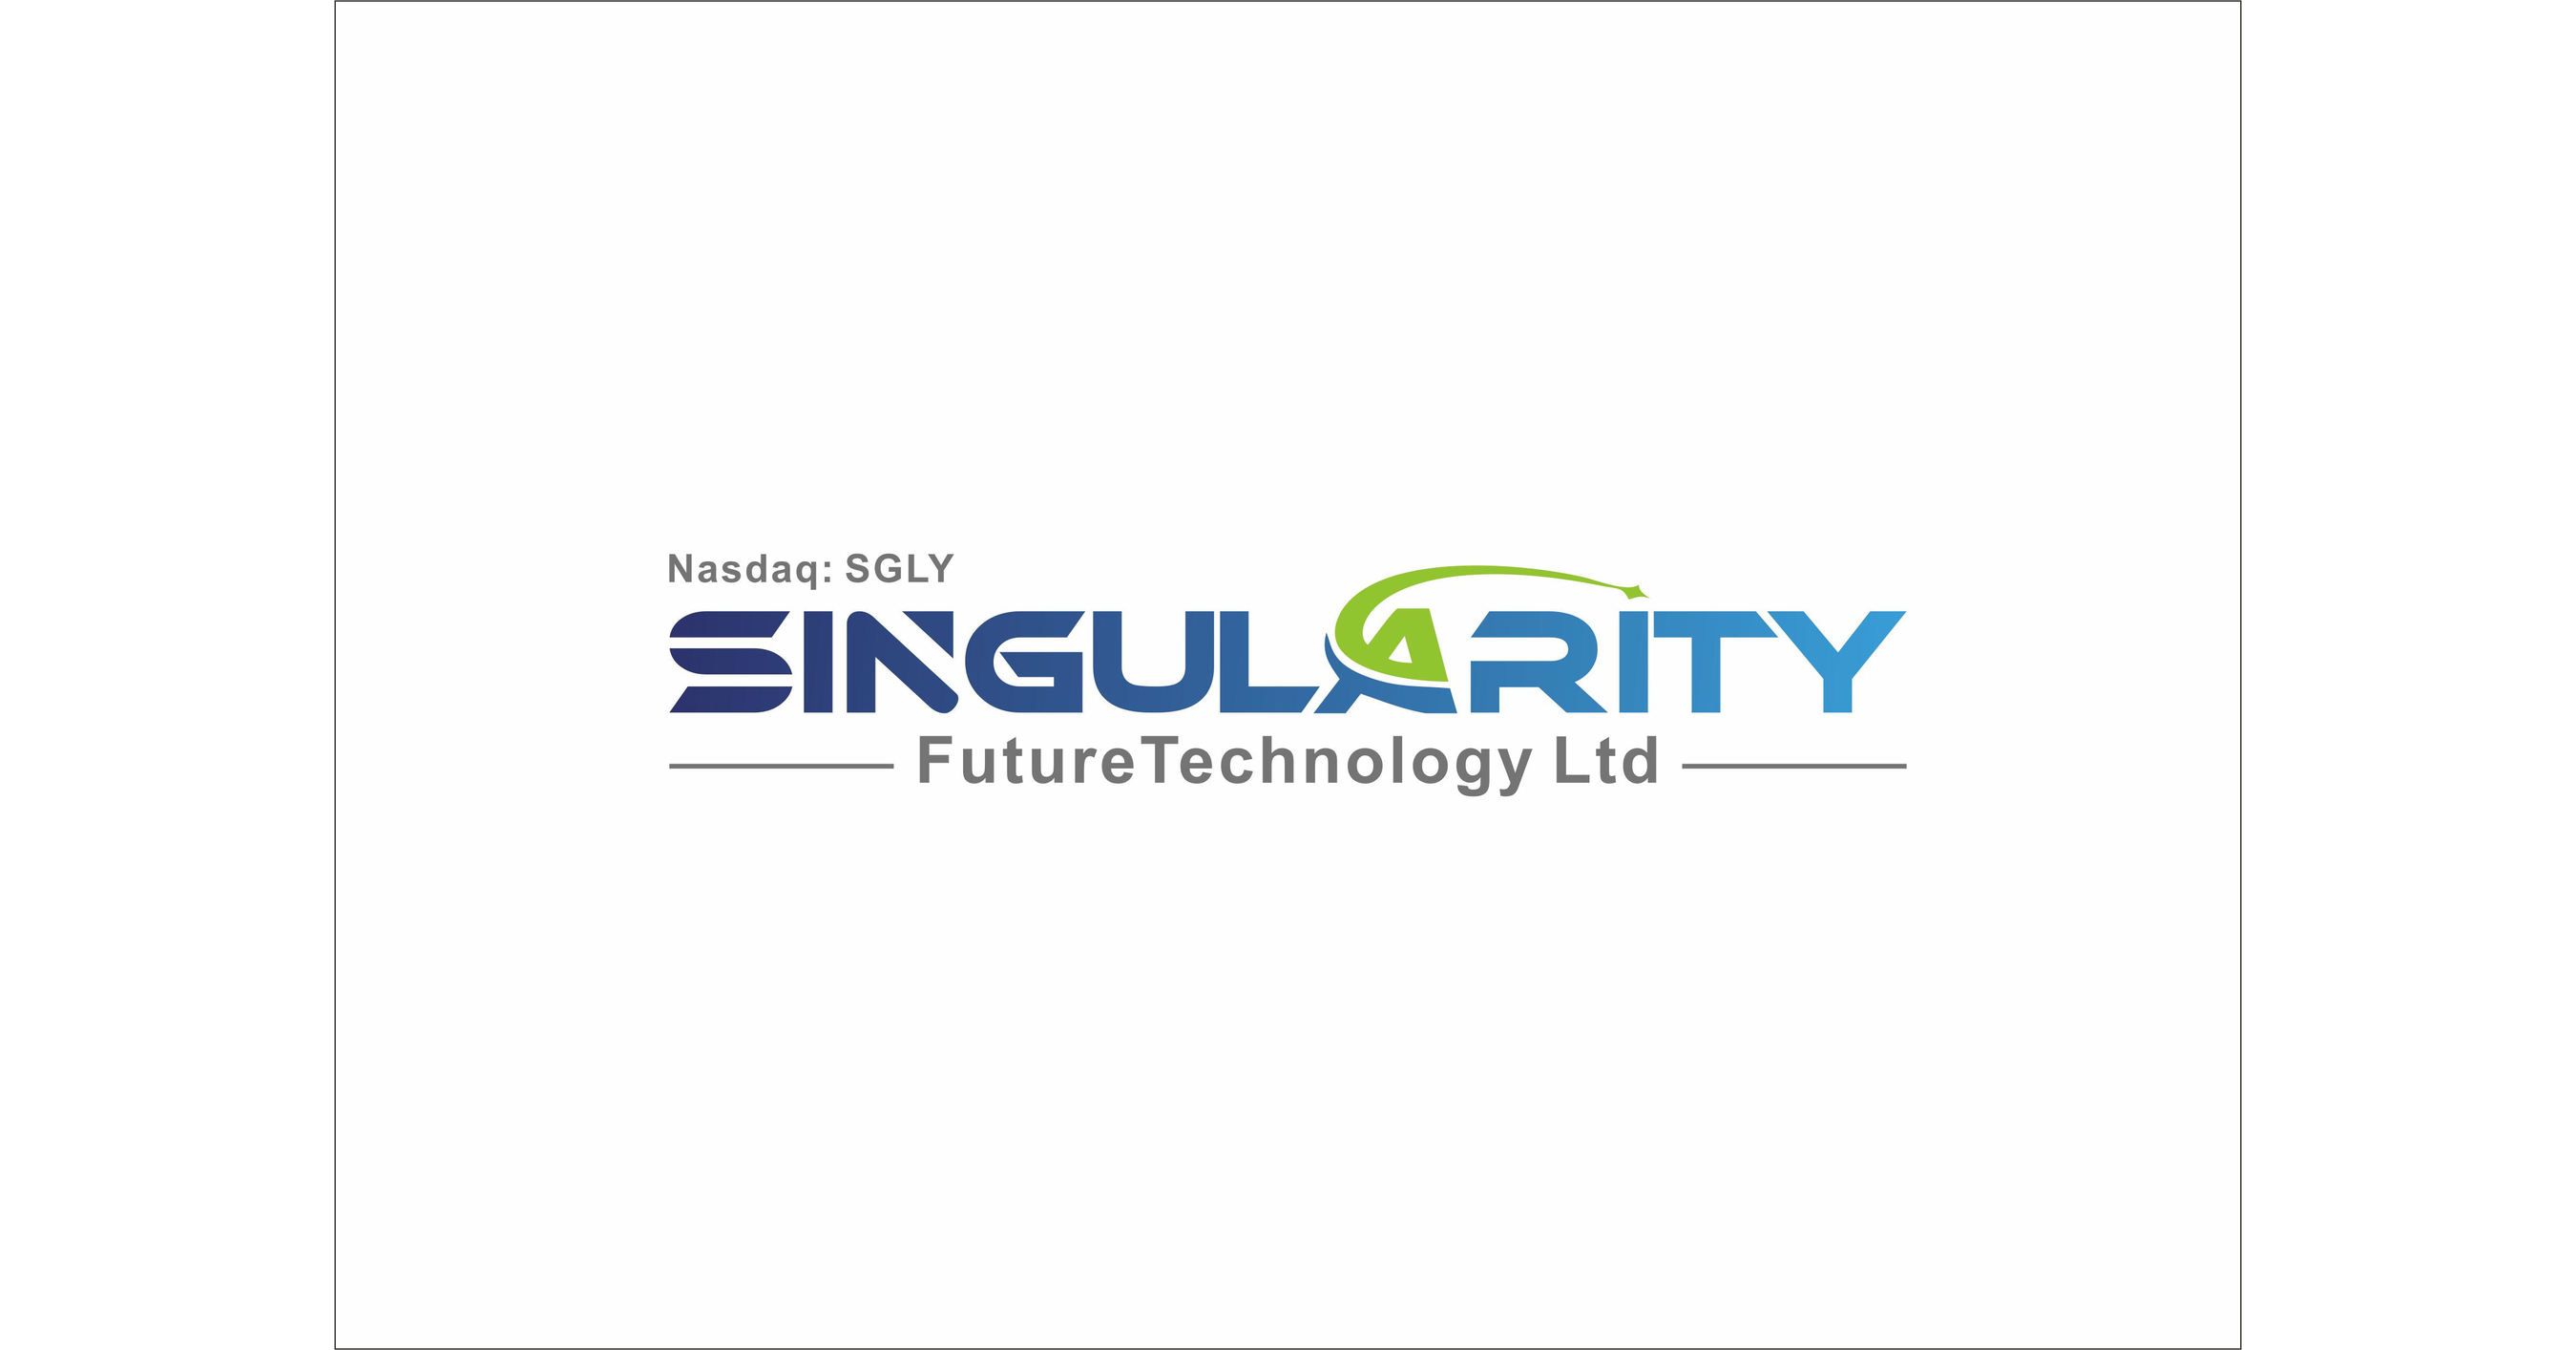 Singularity Future Technology Formally Launches New Website